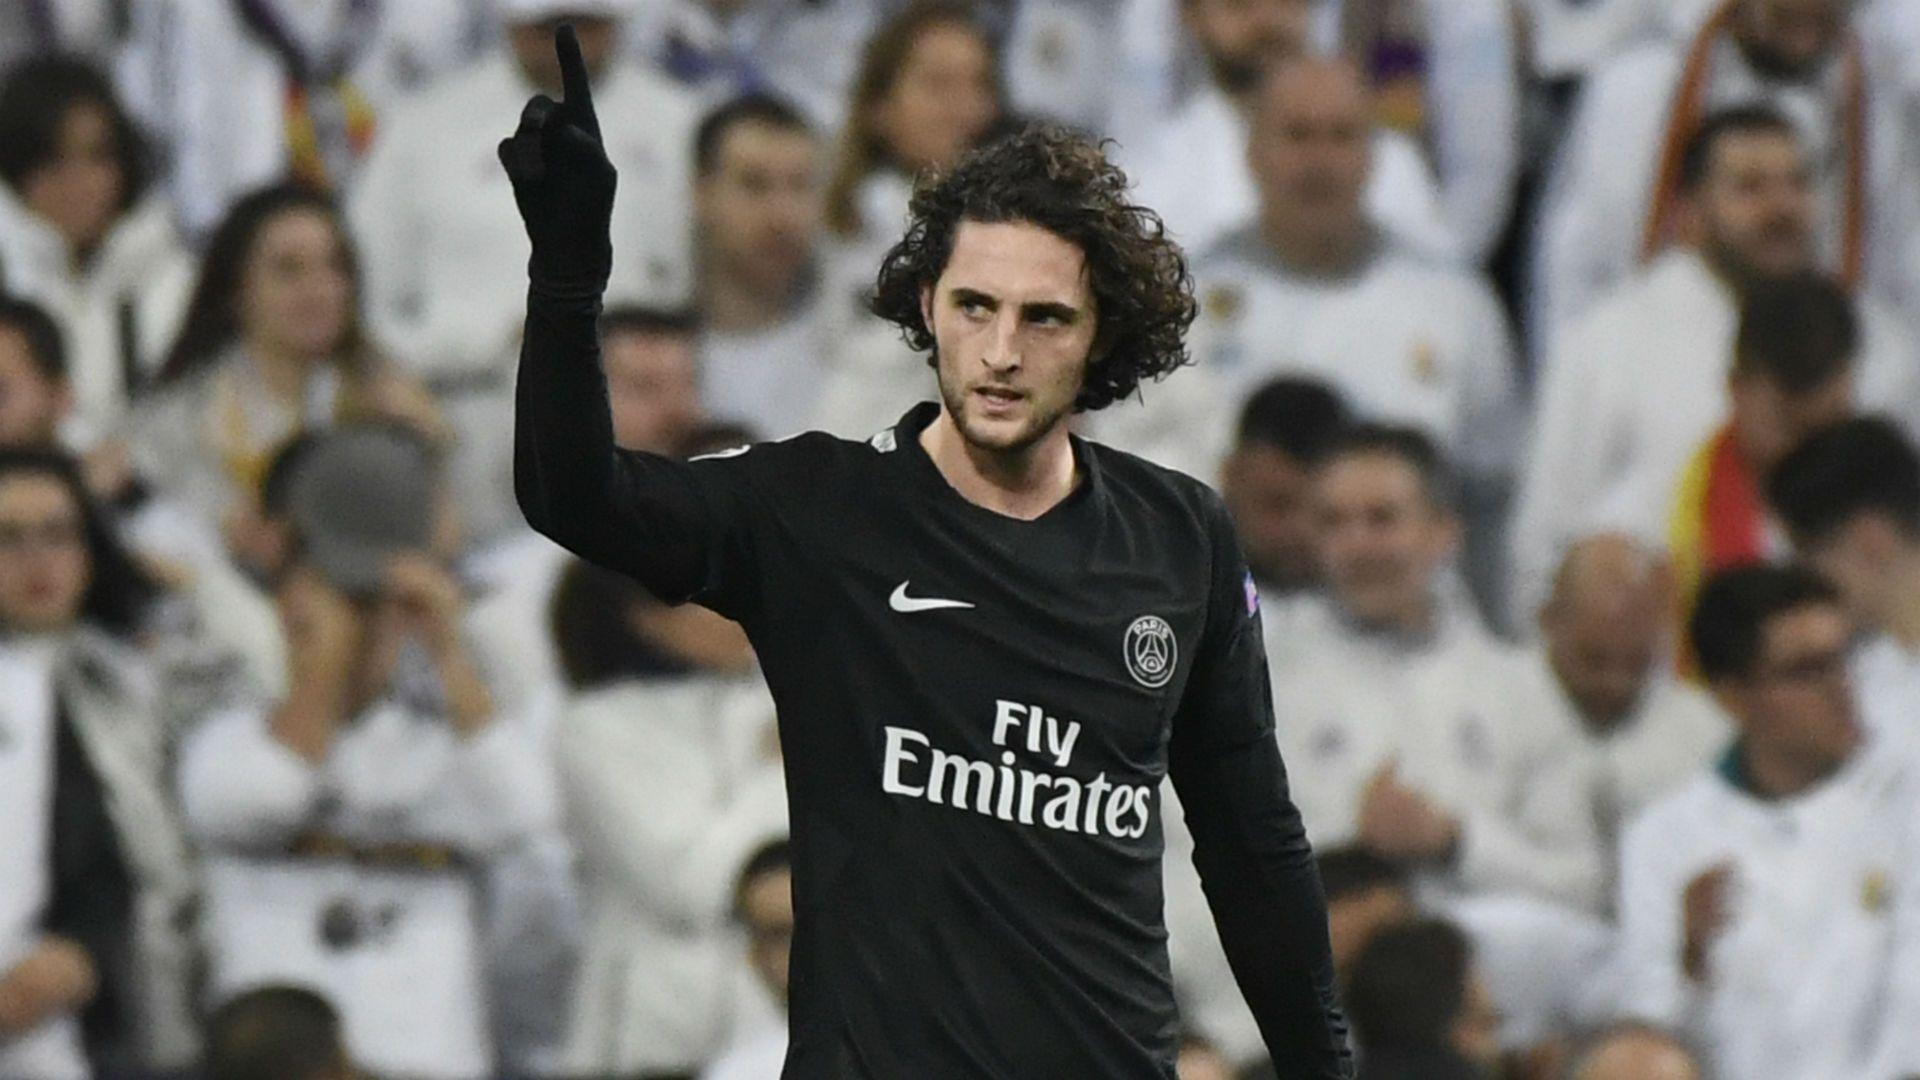 Rabiot rips PSG after Madrid loss: 'We're always floored in the same